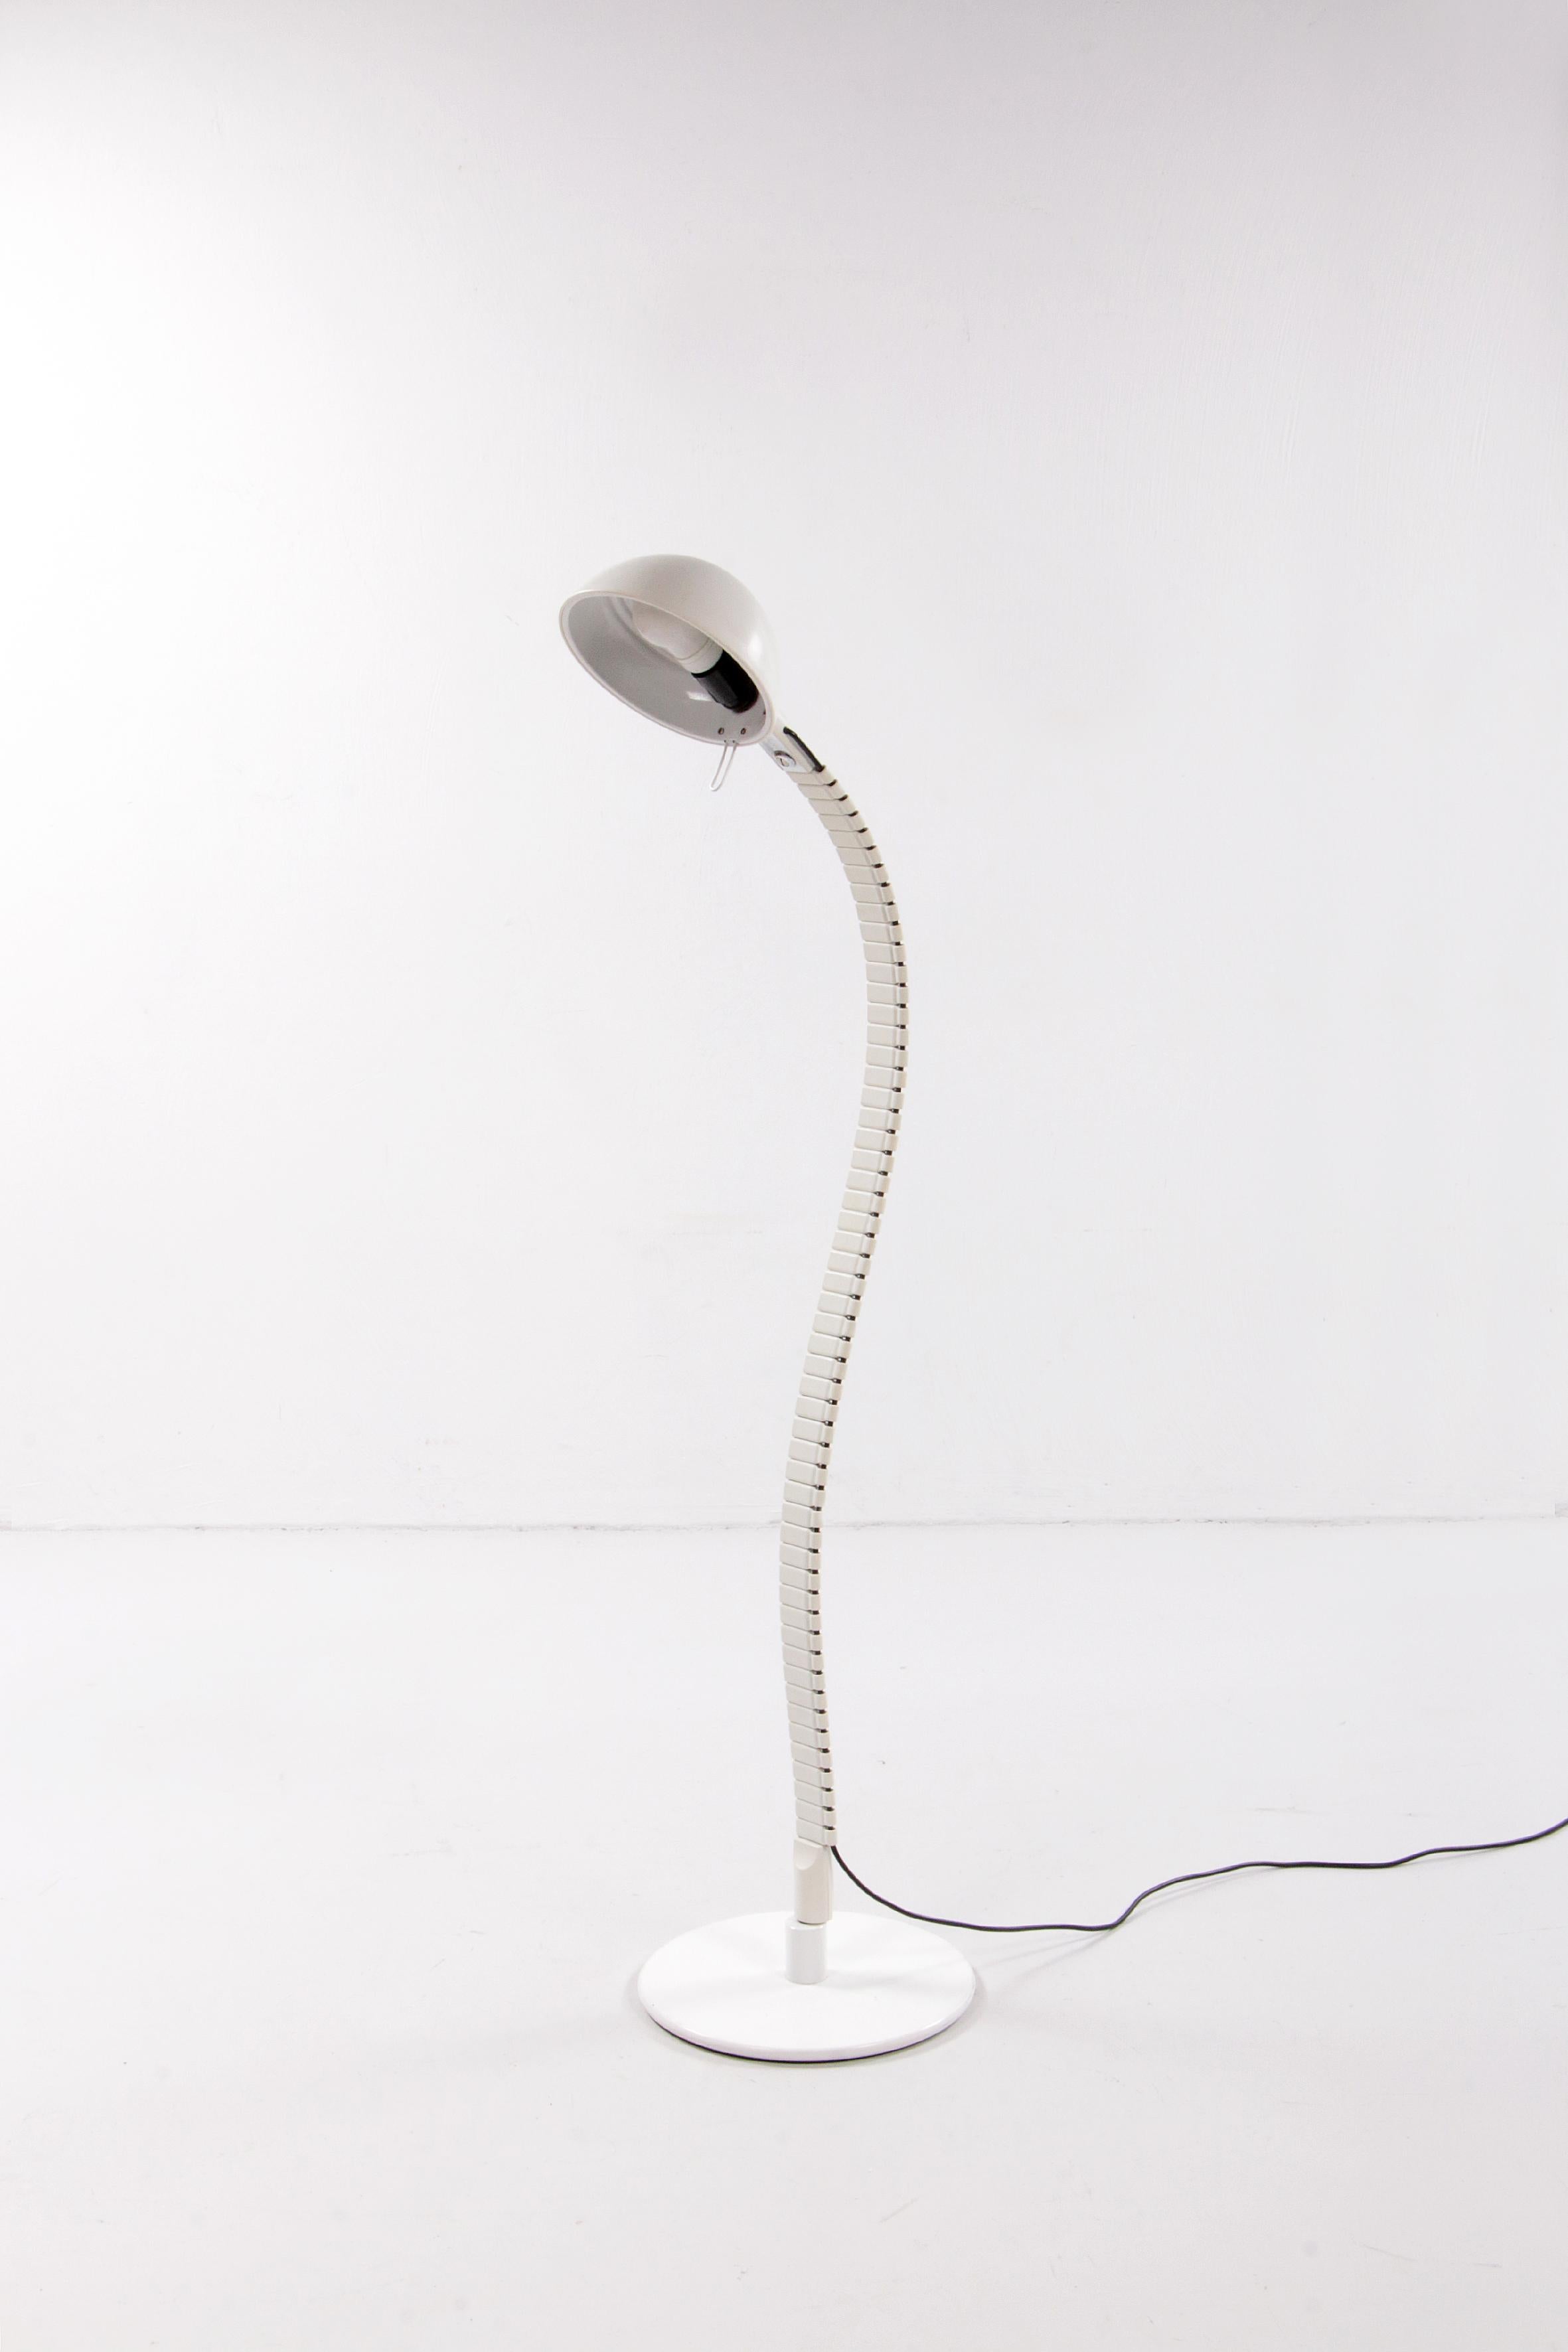 Floor lamp Flex model 2164 by Elio Martinelli for Martinelli Luce,1960 Italy


The 'Flex' floor lamp (model flex Calotta) was designed by Elio Martinelli for Martinelli Luce, Italy in 1969.

The adjustable arm is inspired by the human spine and made